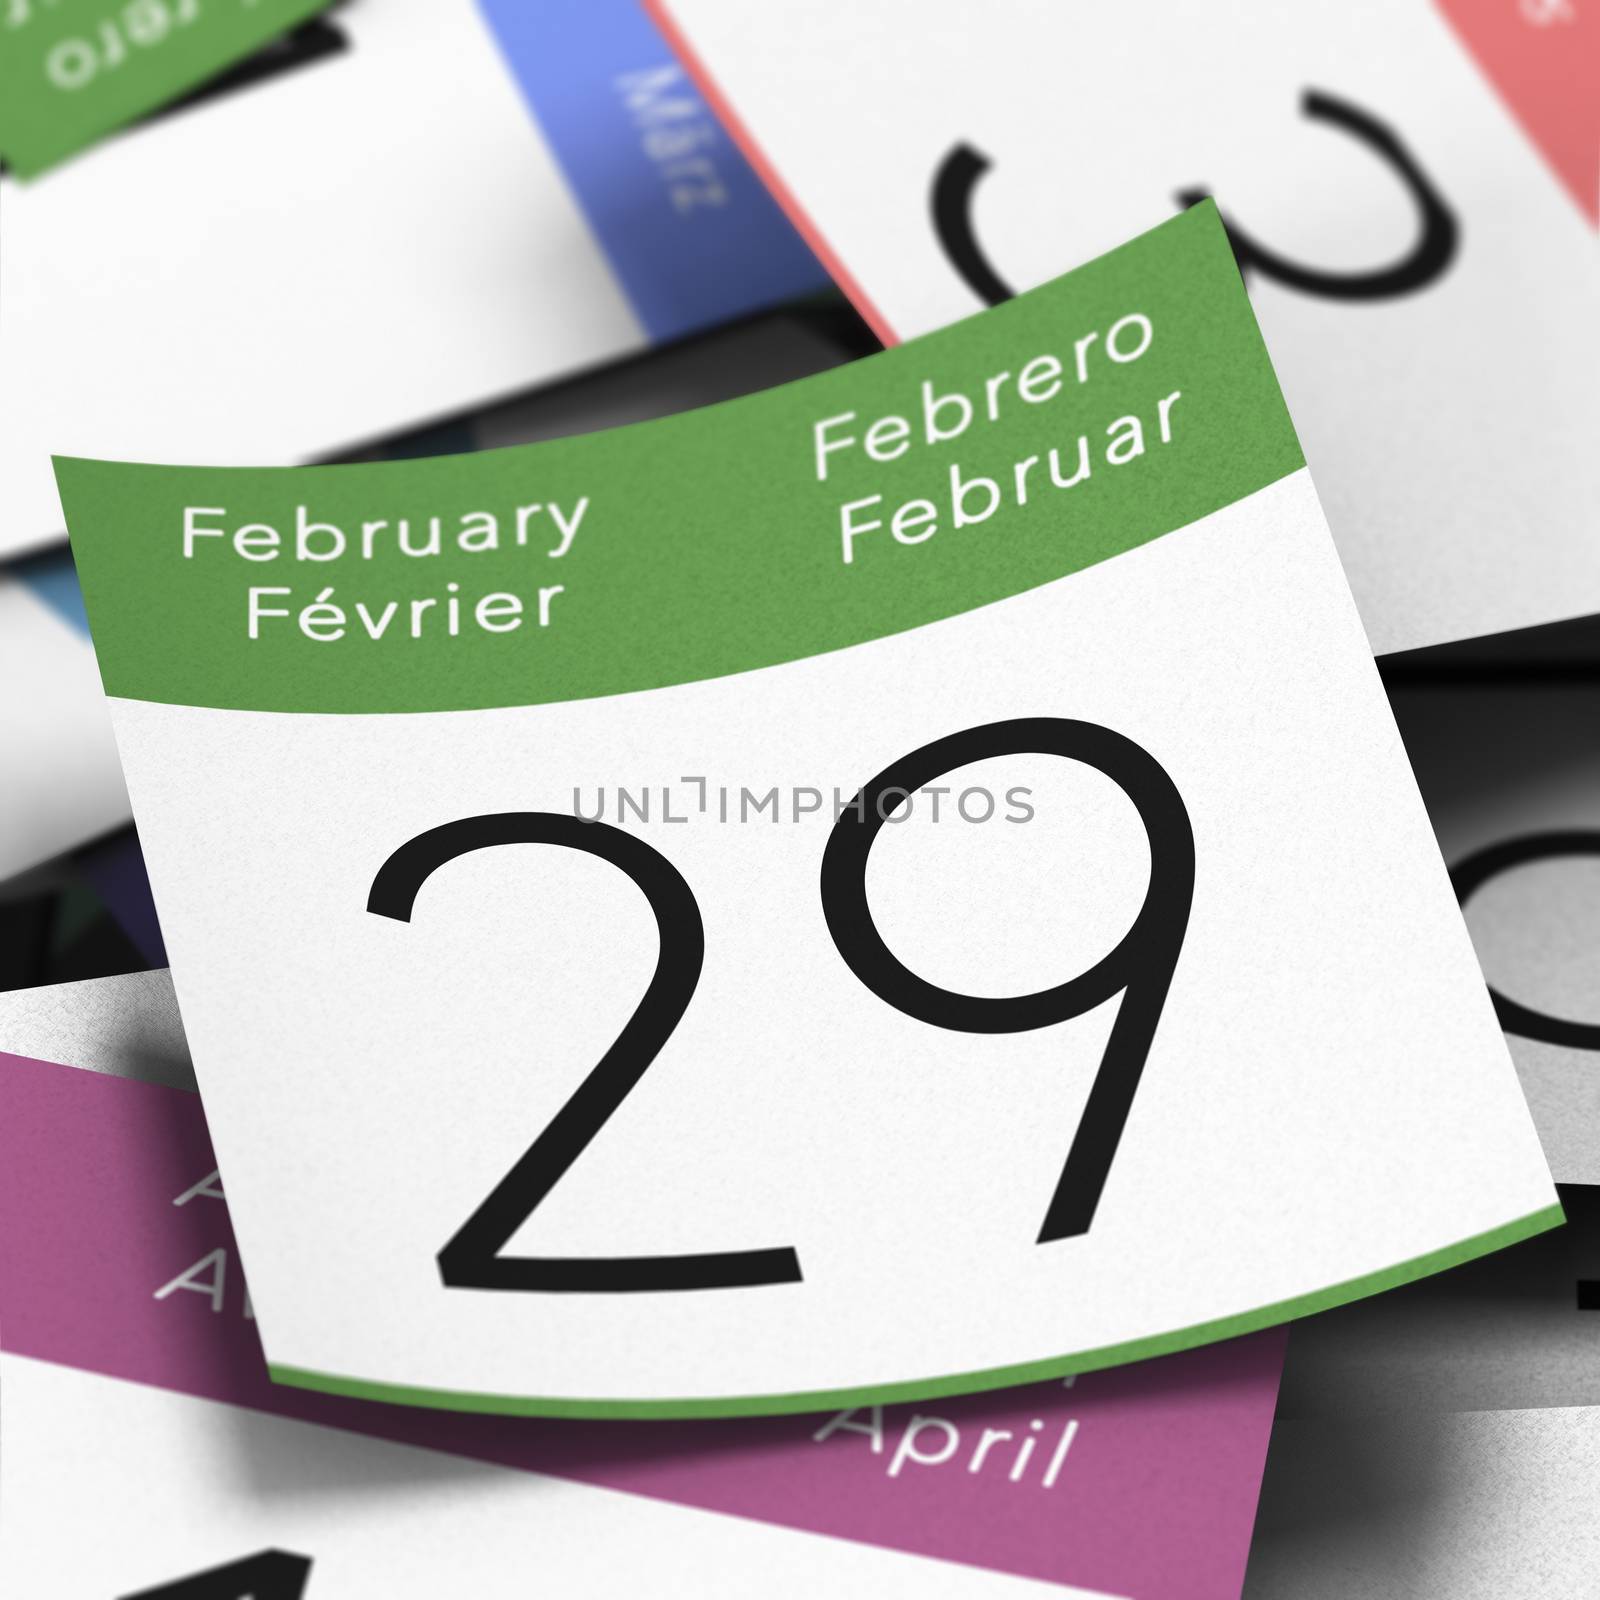 Leap Year February 29th by Olivier-Le-Moal